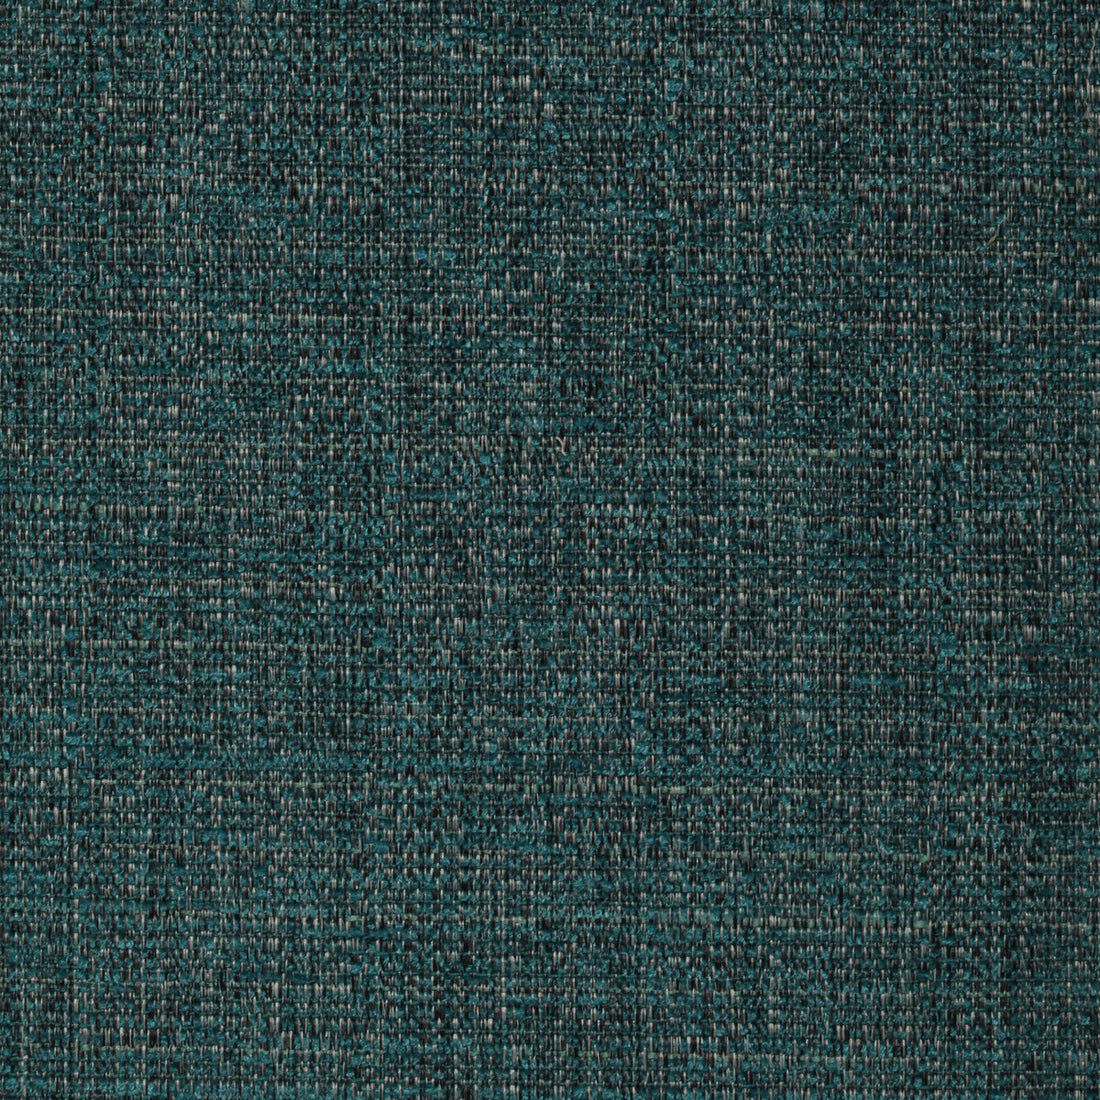 Kravet Contract fabric in 35128-35 color - pattern 35128.35.0 - by Kravet Contract in the Crypton Incase collection